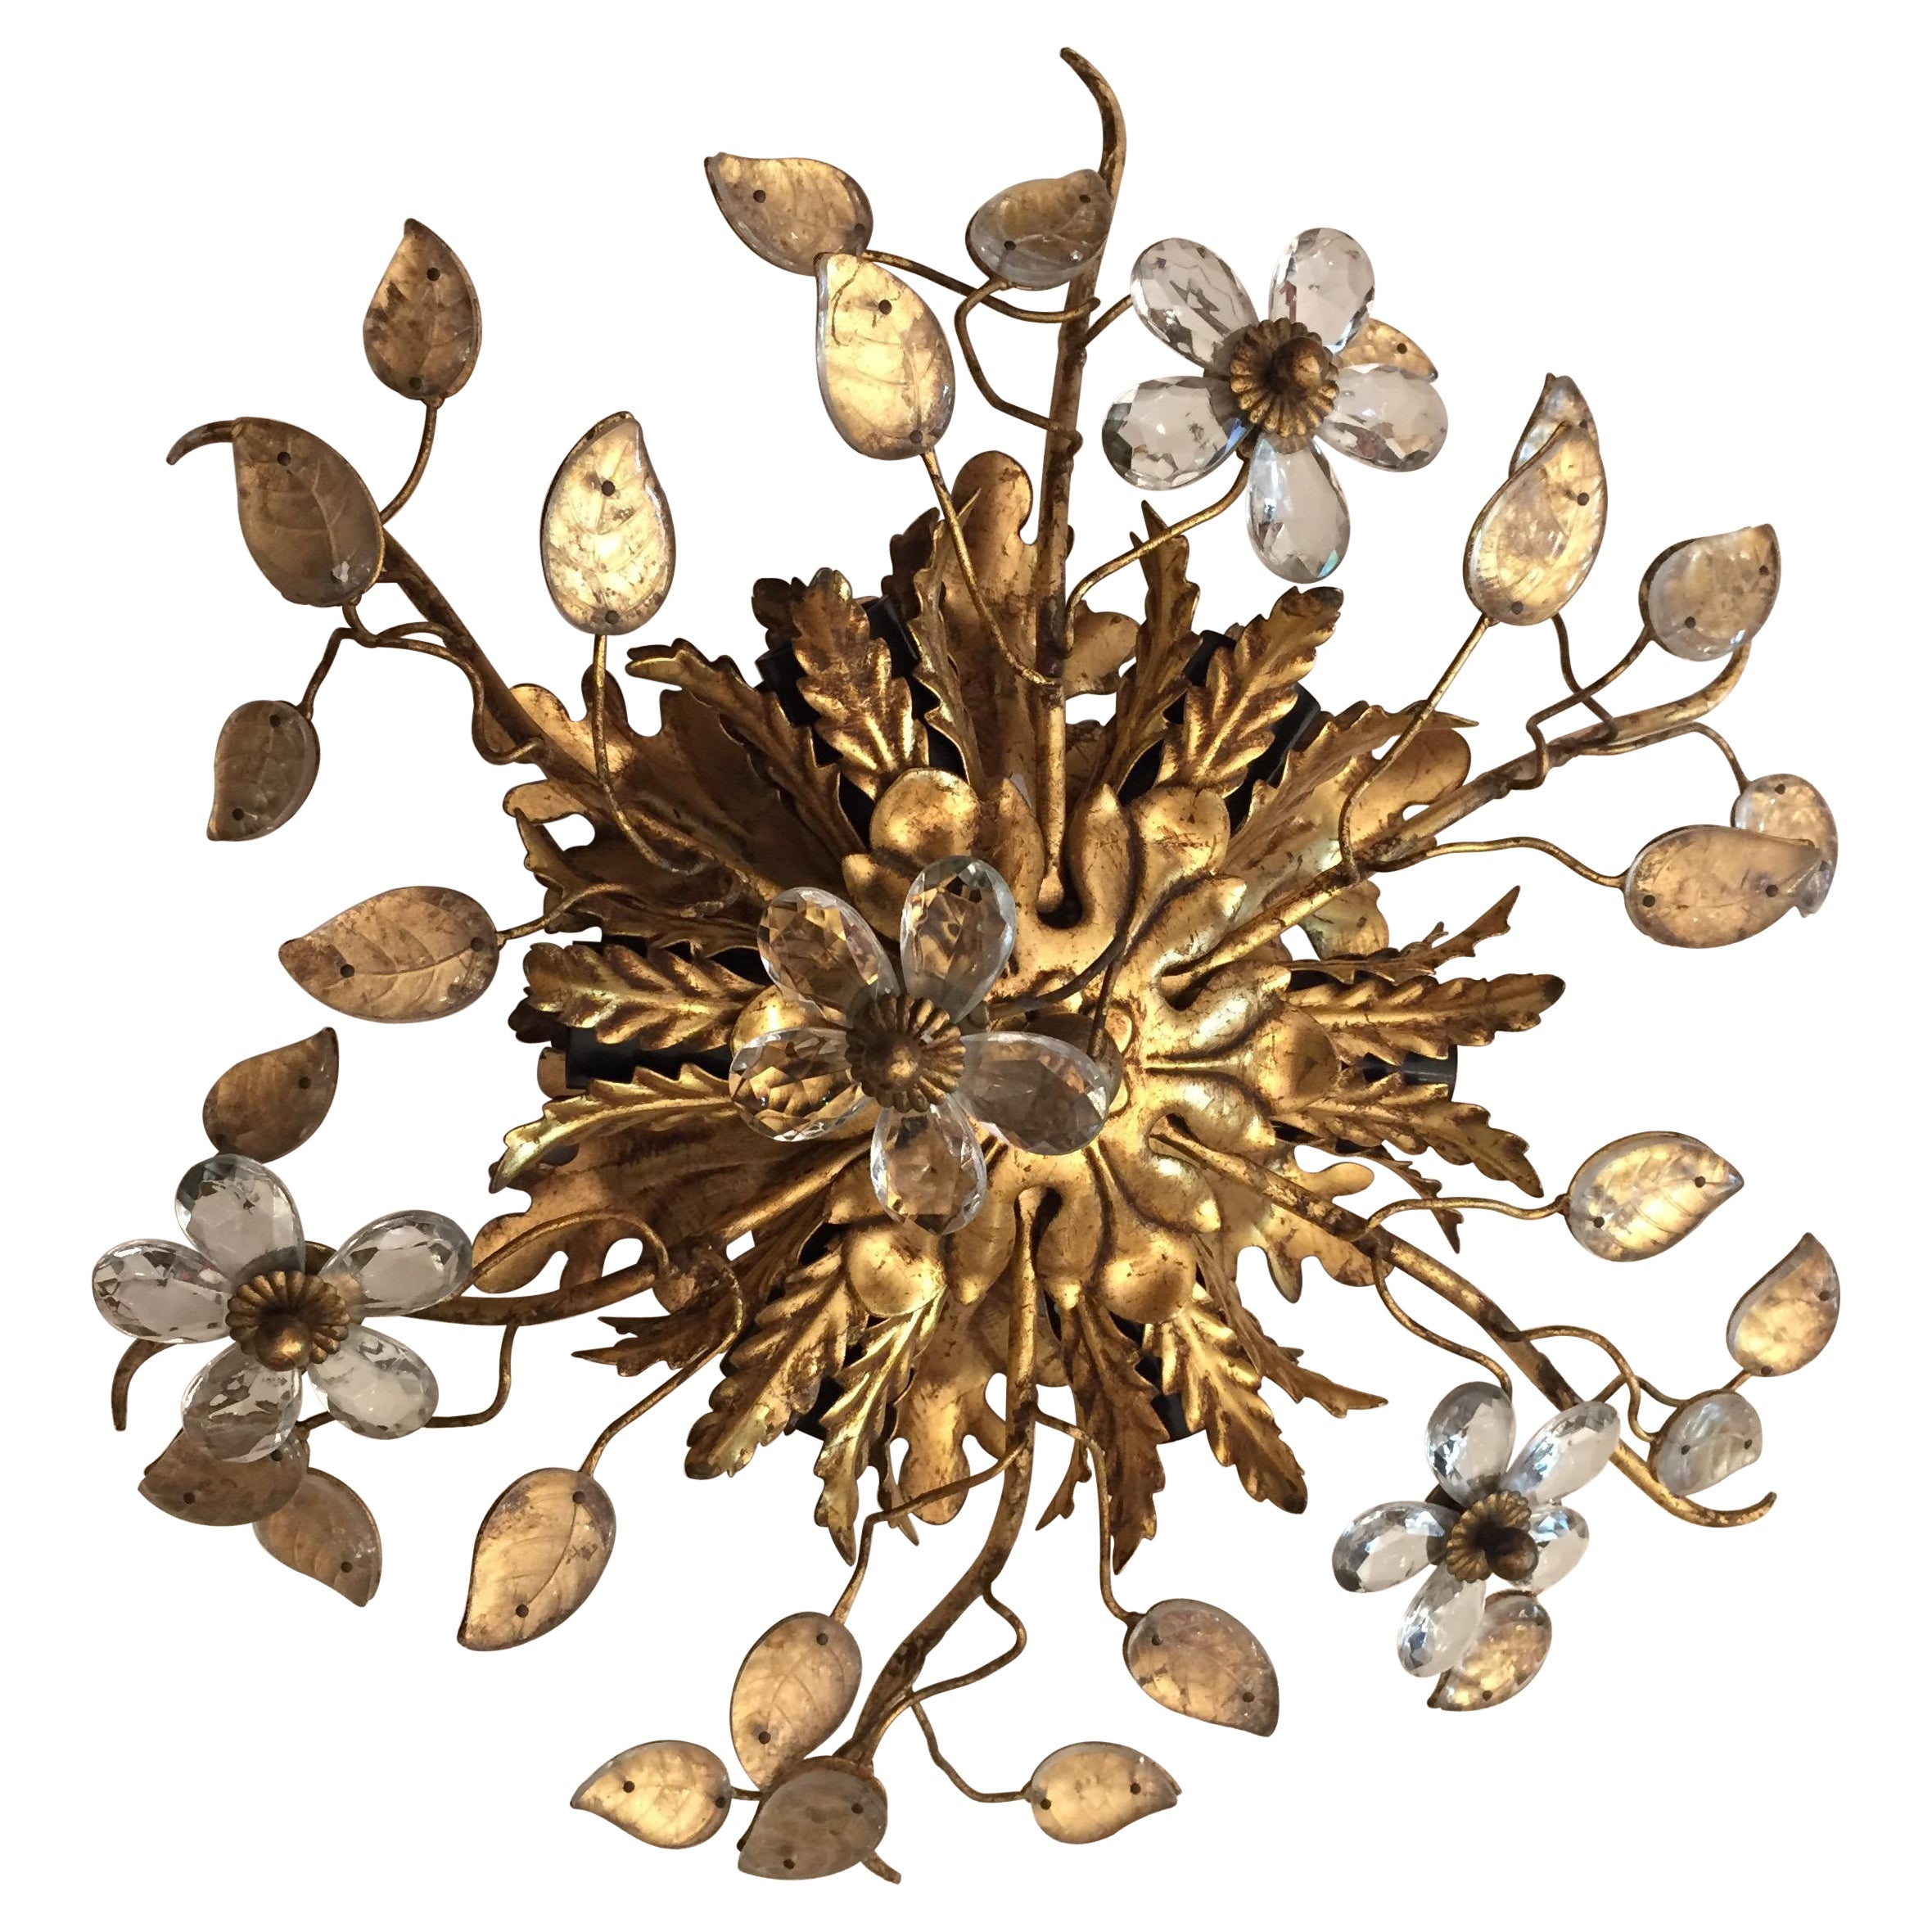 Italian Florentine flush mount ceiling light by Banci Firenze, Florence (Firenze), Italy, 1980s.
Stunning gilt acanthus leaf design with clear Murano glass flowers and leaves on fine gilt stems.
Featuring 6 bulb holders E14, small screw